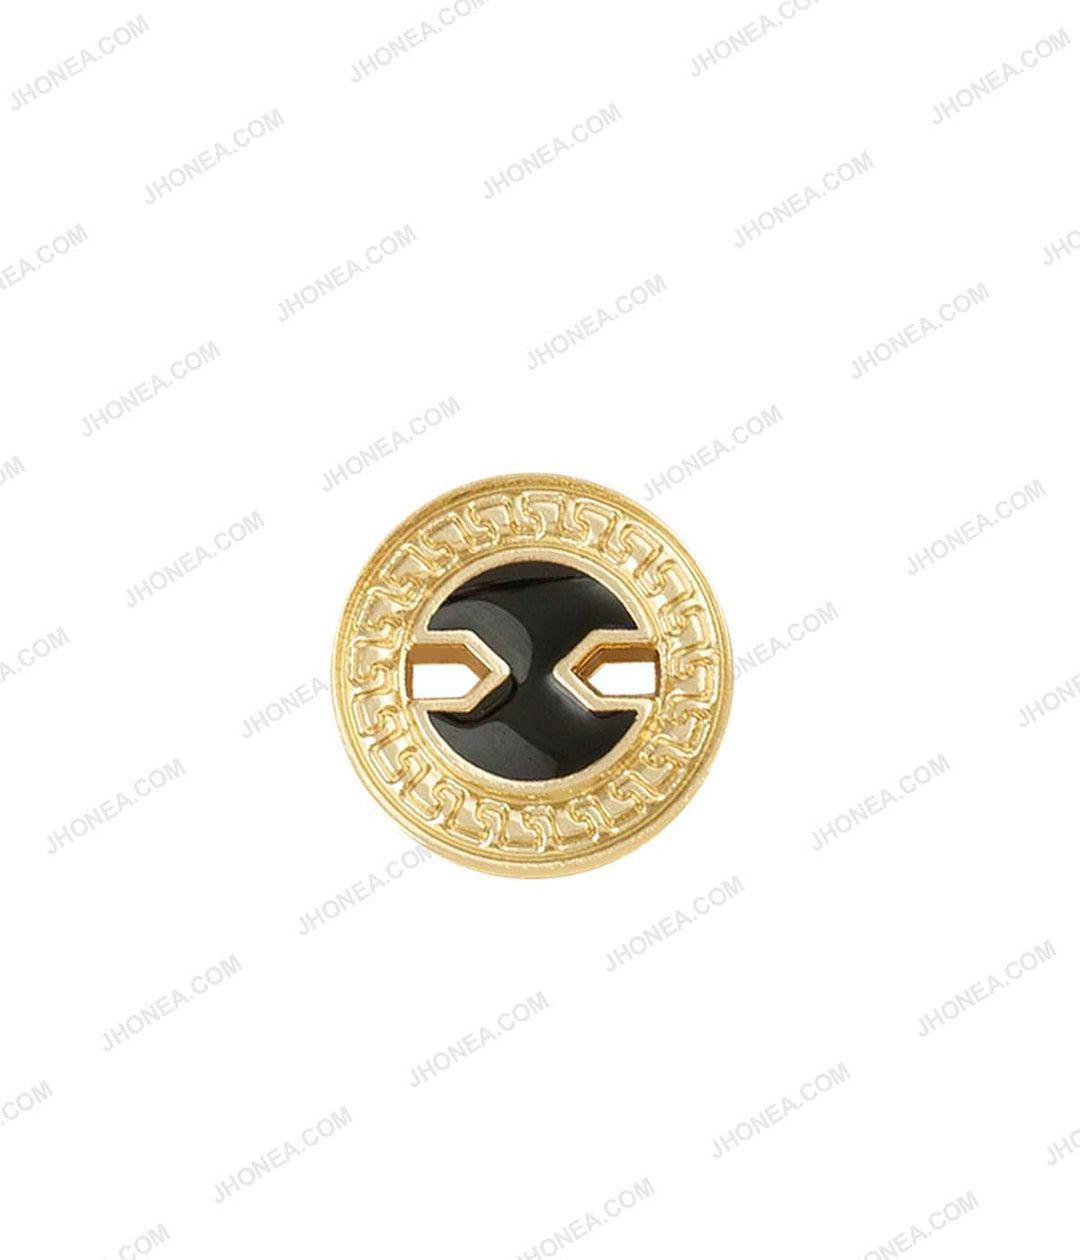 Shiny Bright Gold with Black Color Cutwork Enamel Royal Regal Buttons